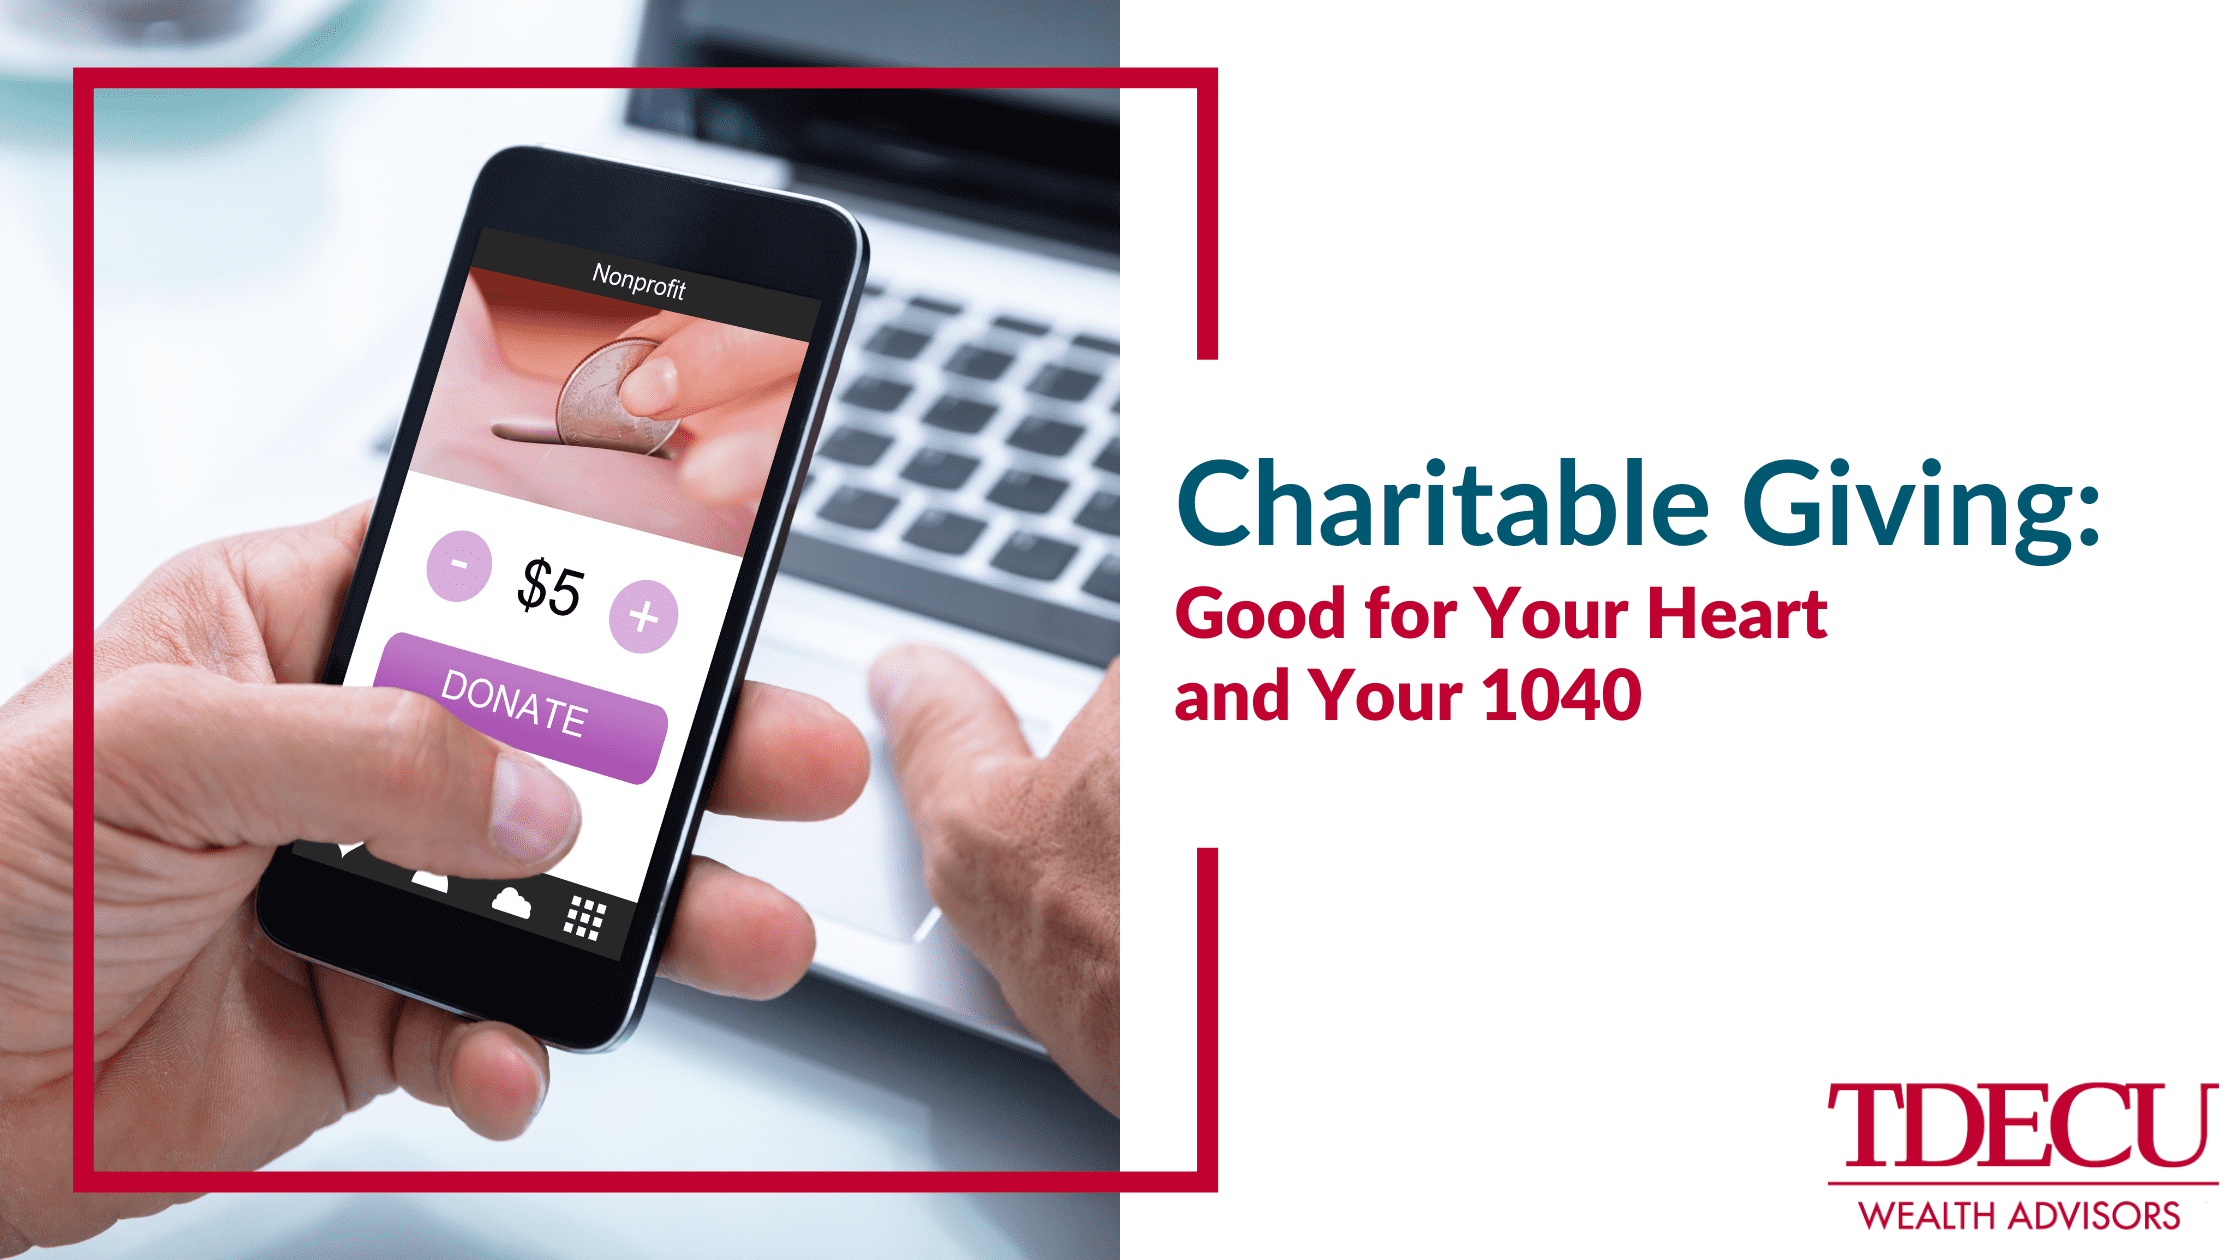 Charitable Giving: Good for Your Heart and Your 1040